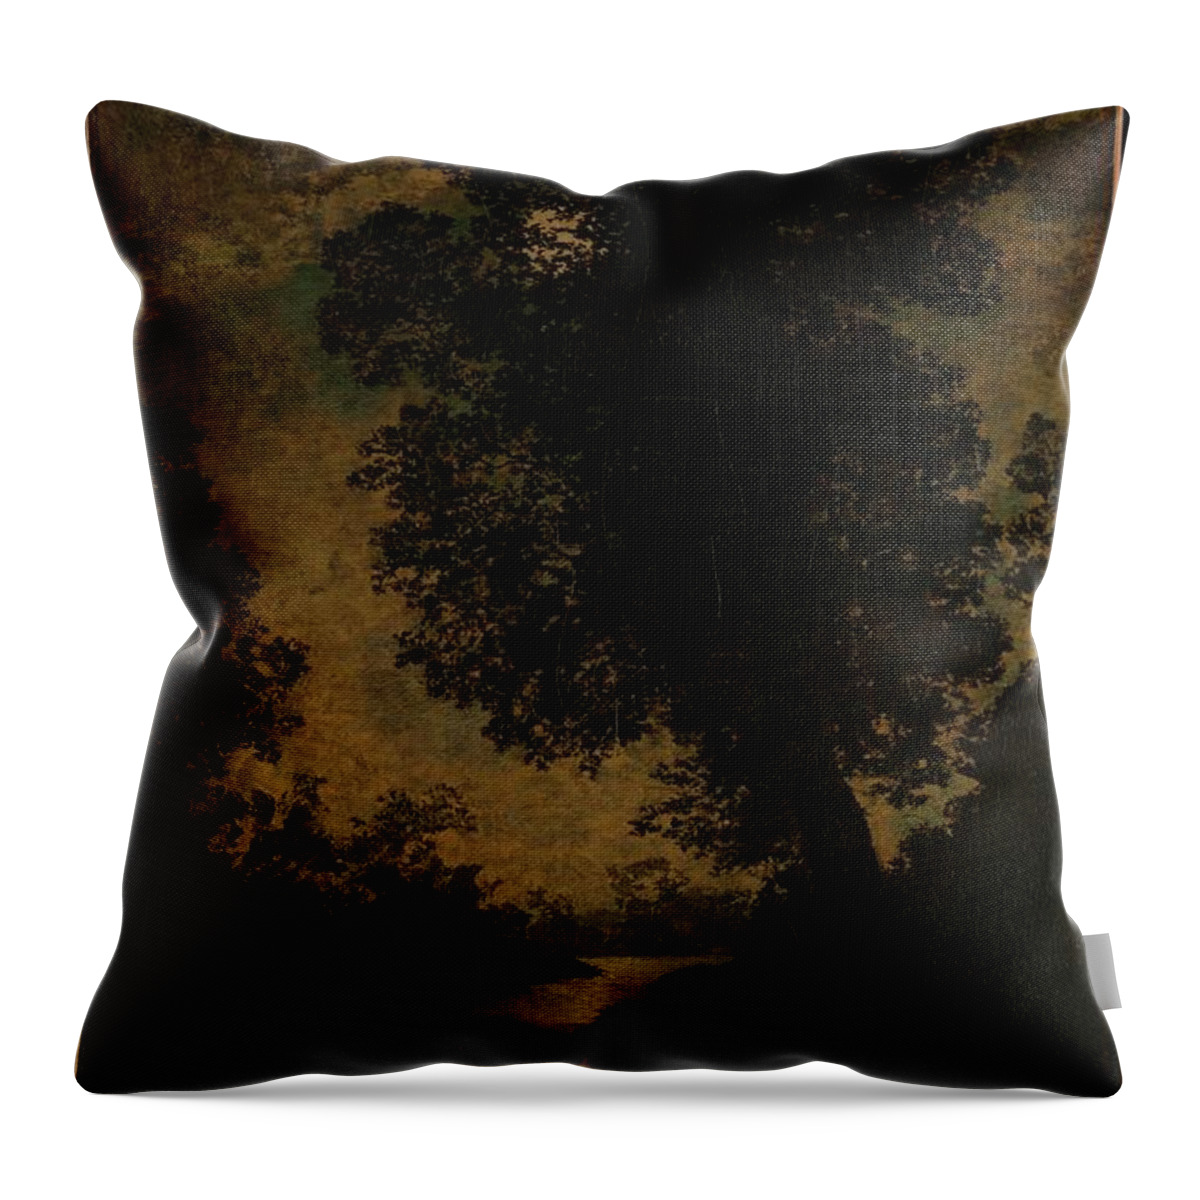 A Waterfall Throw Pillow featuring the painting A Waterfall, Moonlight by Ralph Albert